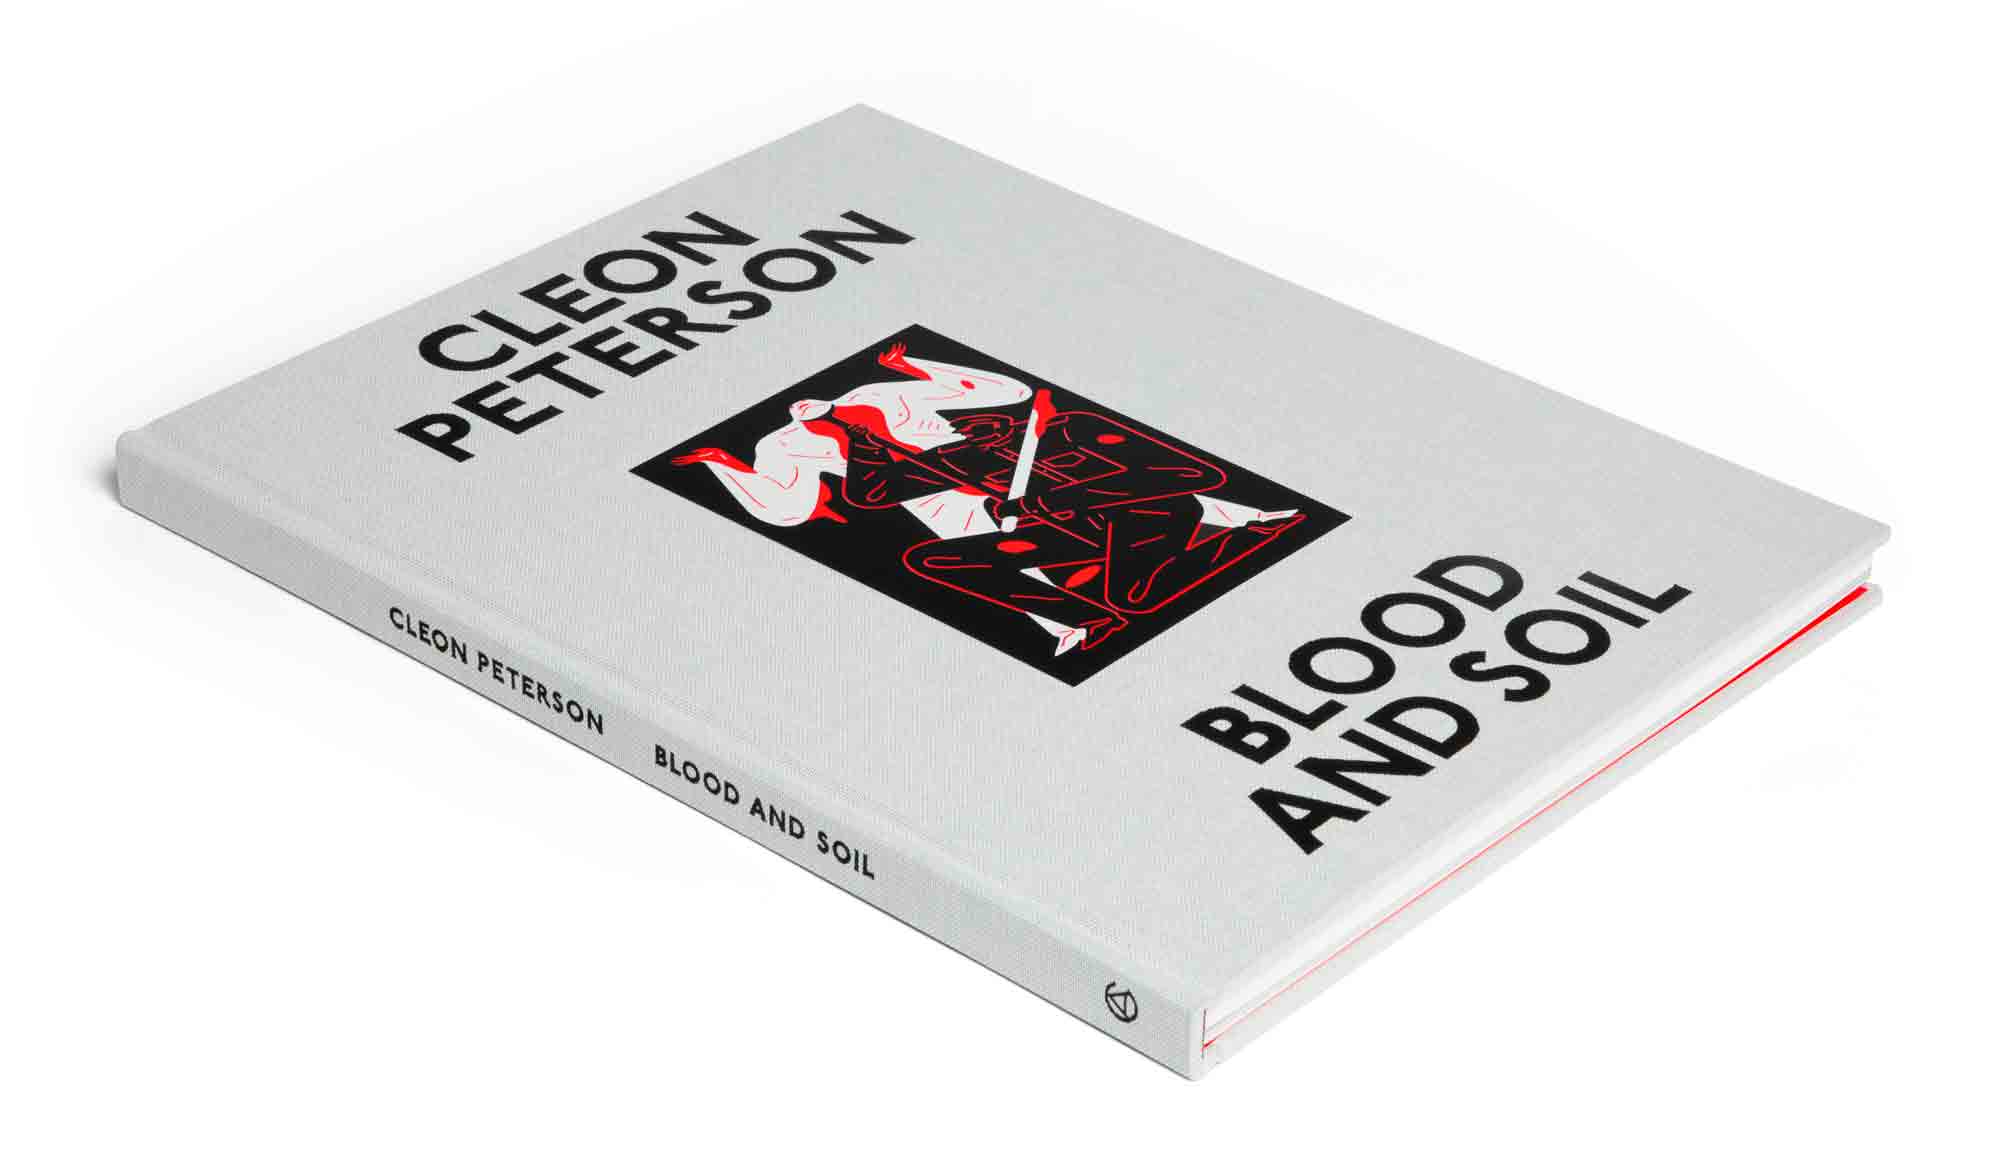 Cleon Peterson Blood and Soil Book 1